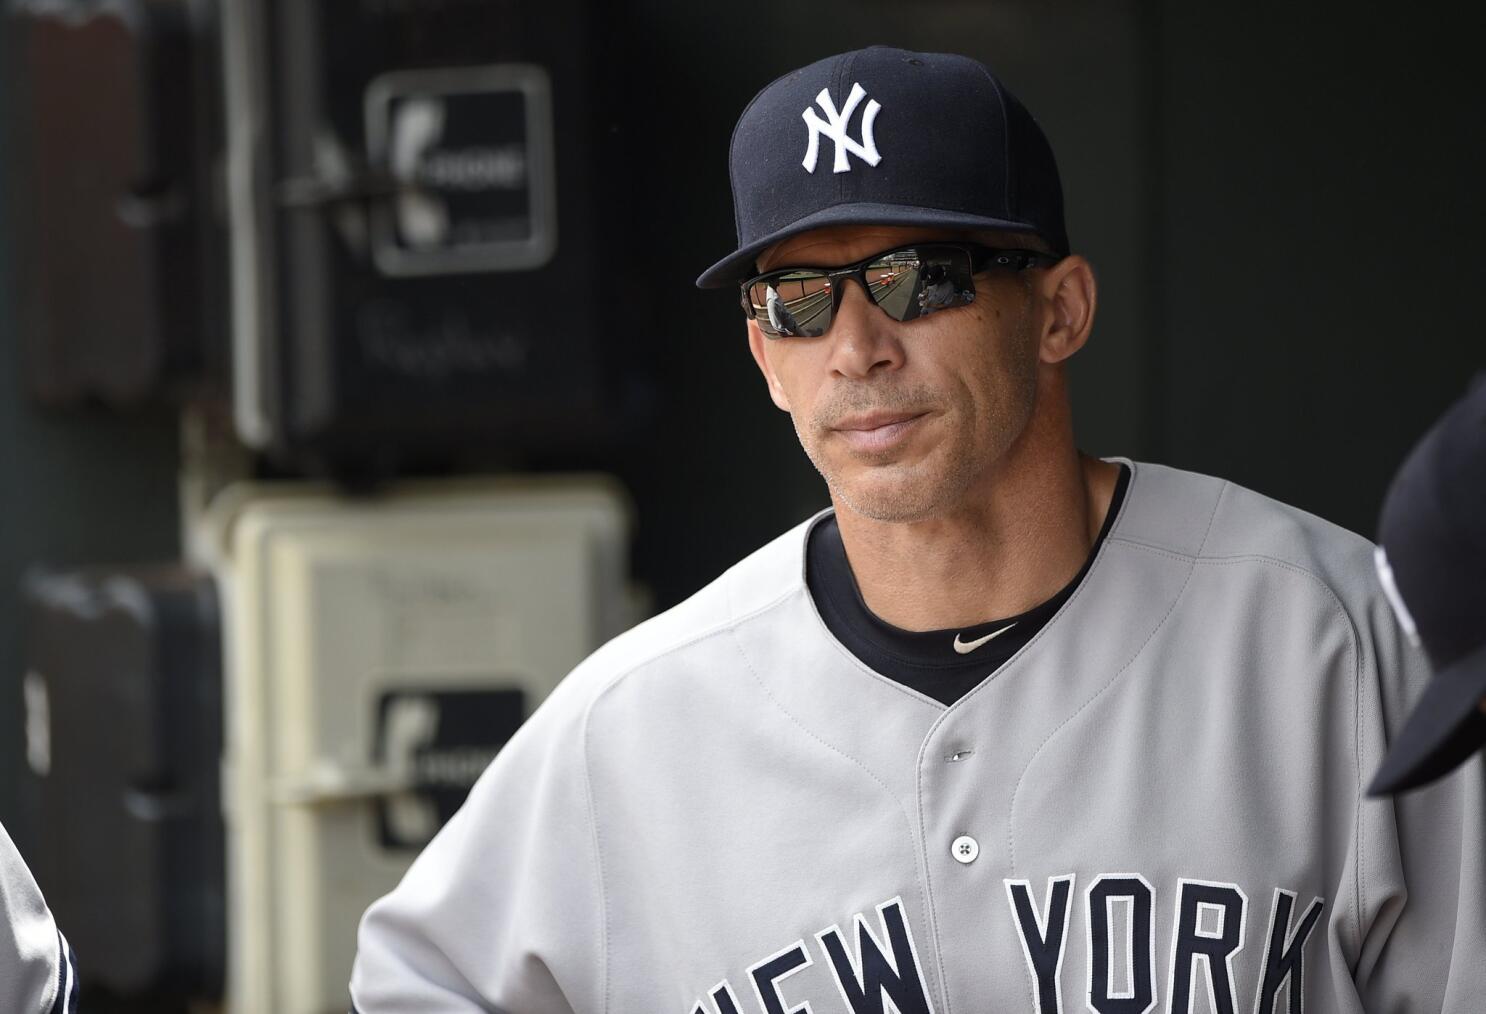 Yankees hire 3-time All-Star as next hitting coach after stunning